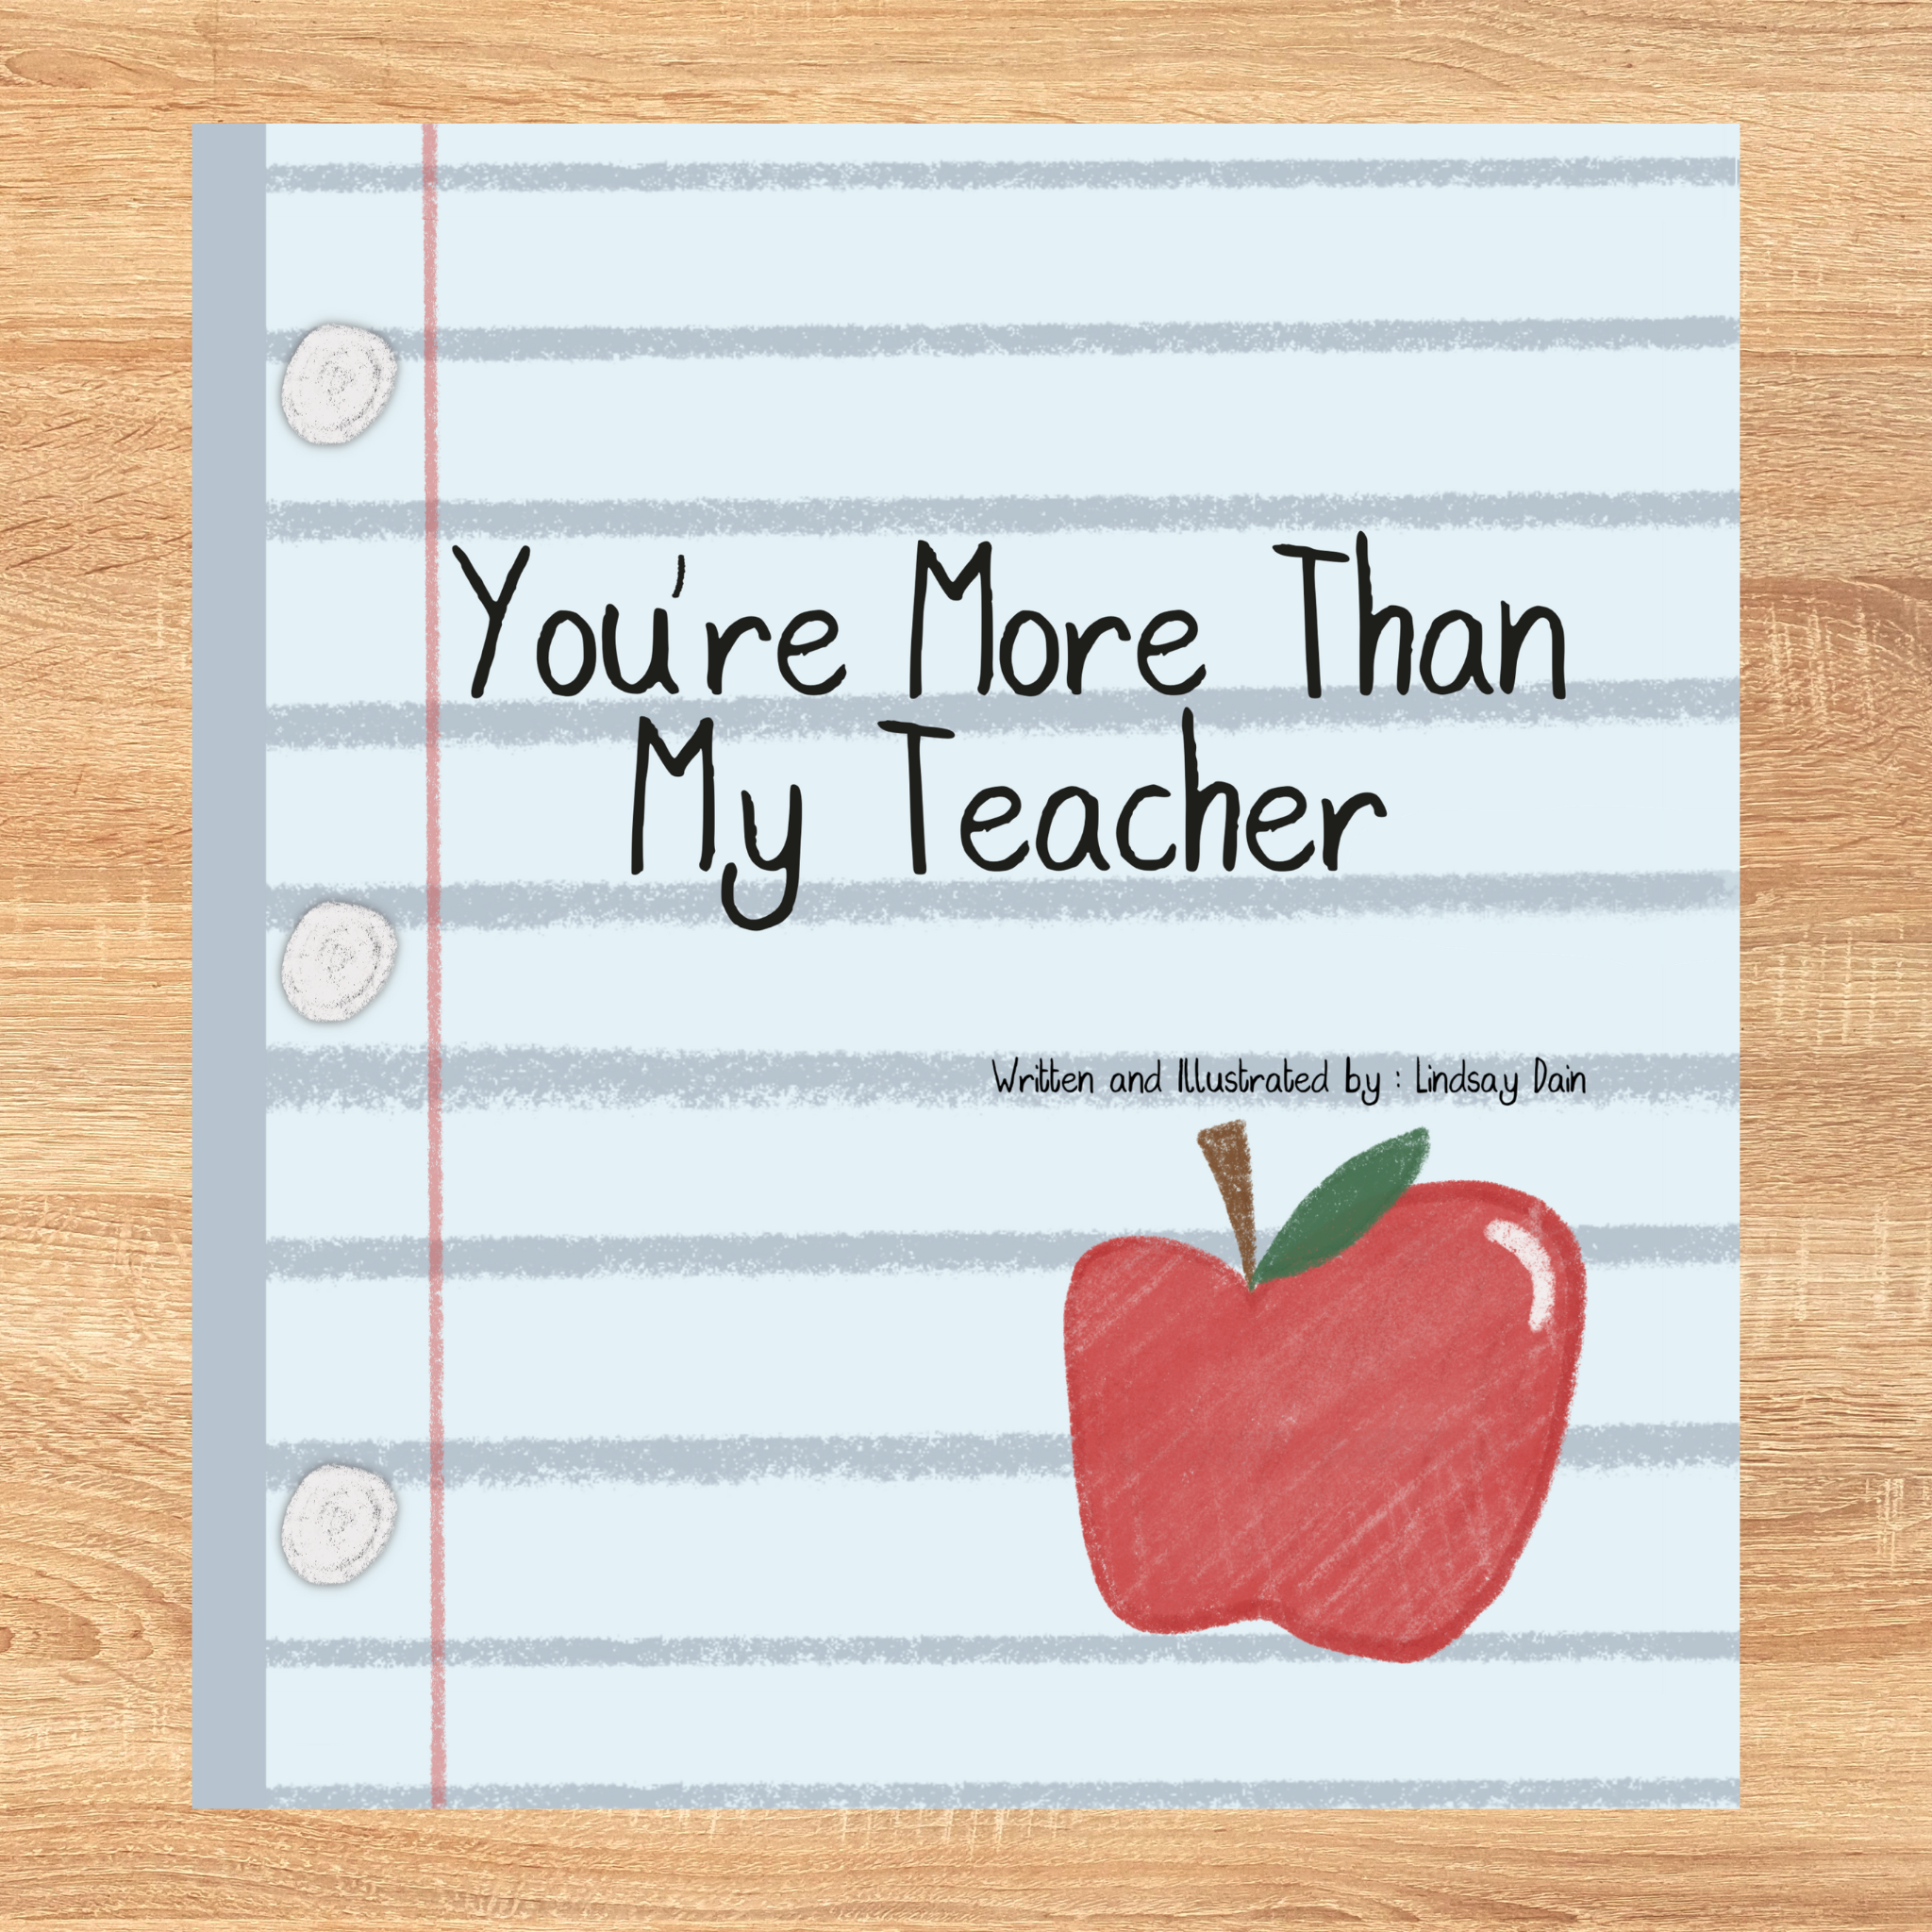 front cover image of the book "You're More Than My Teacher" a self published picture book from Kindle Direct Publishing and Amazon KDP 